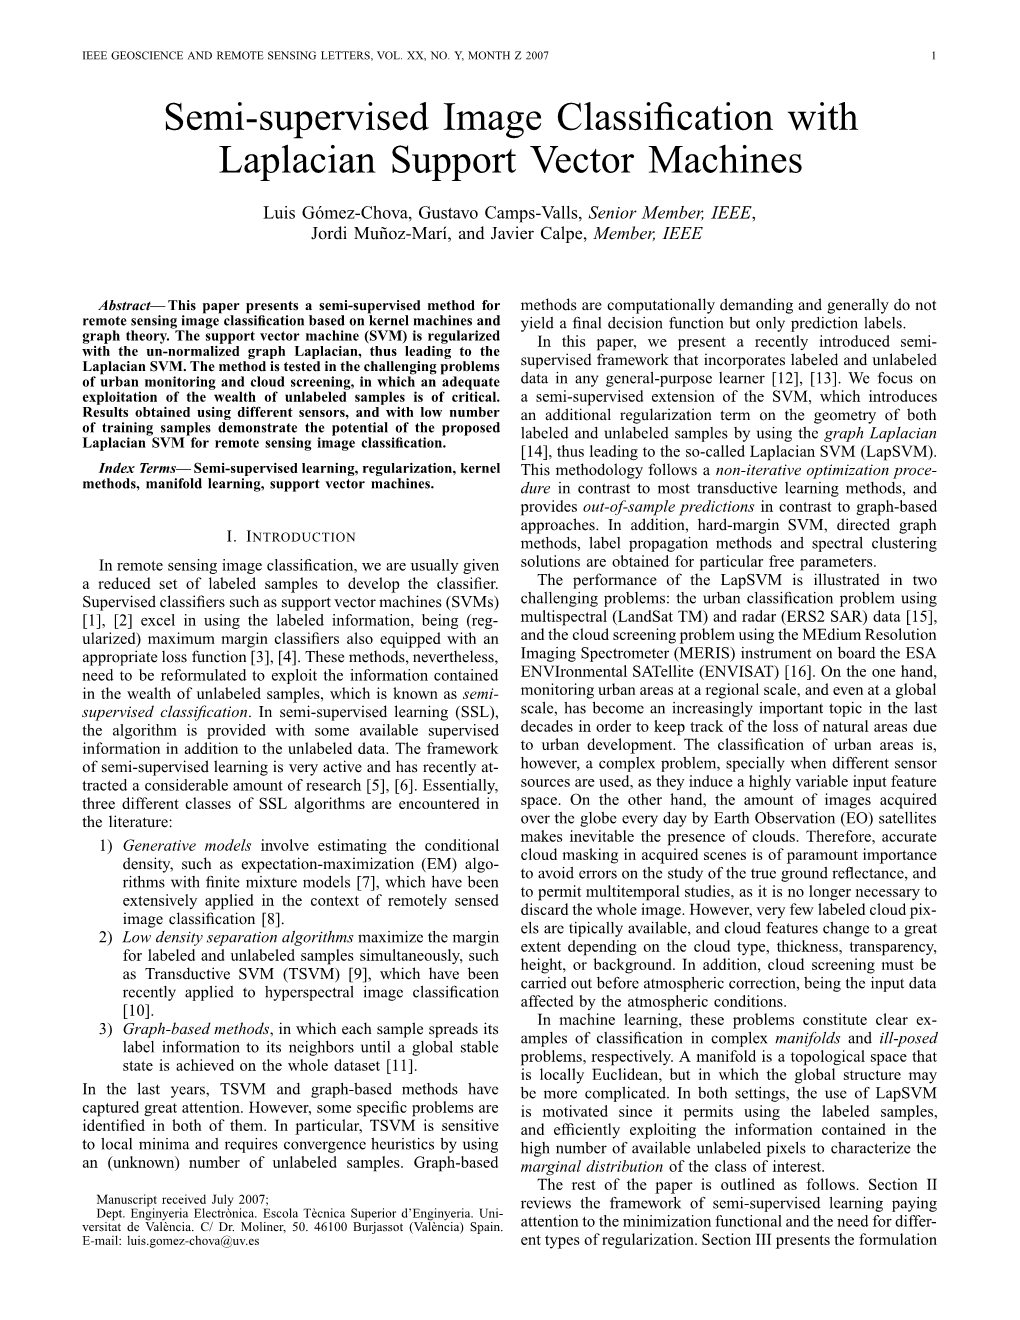 Semi-Supervised Image Classification with Laplacian Support Vector